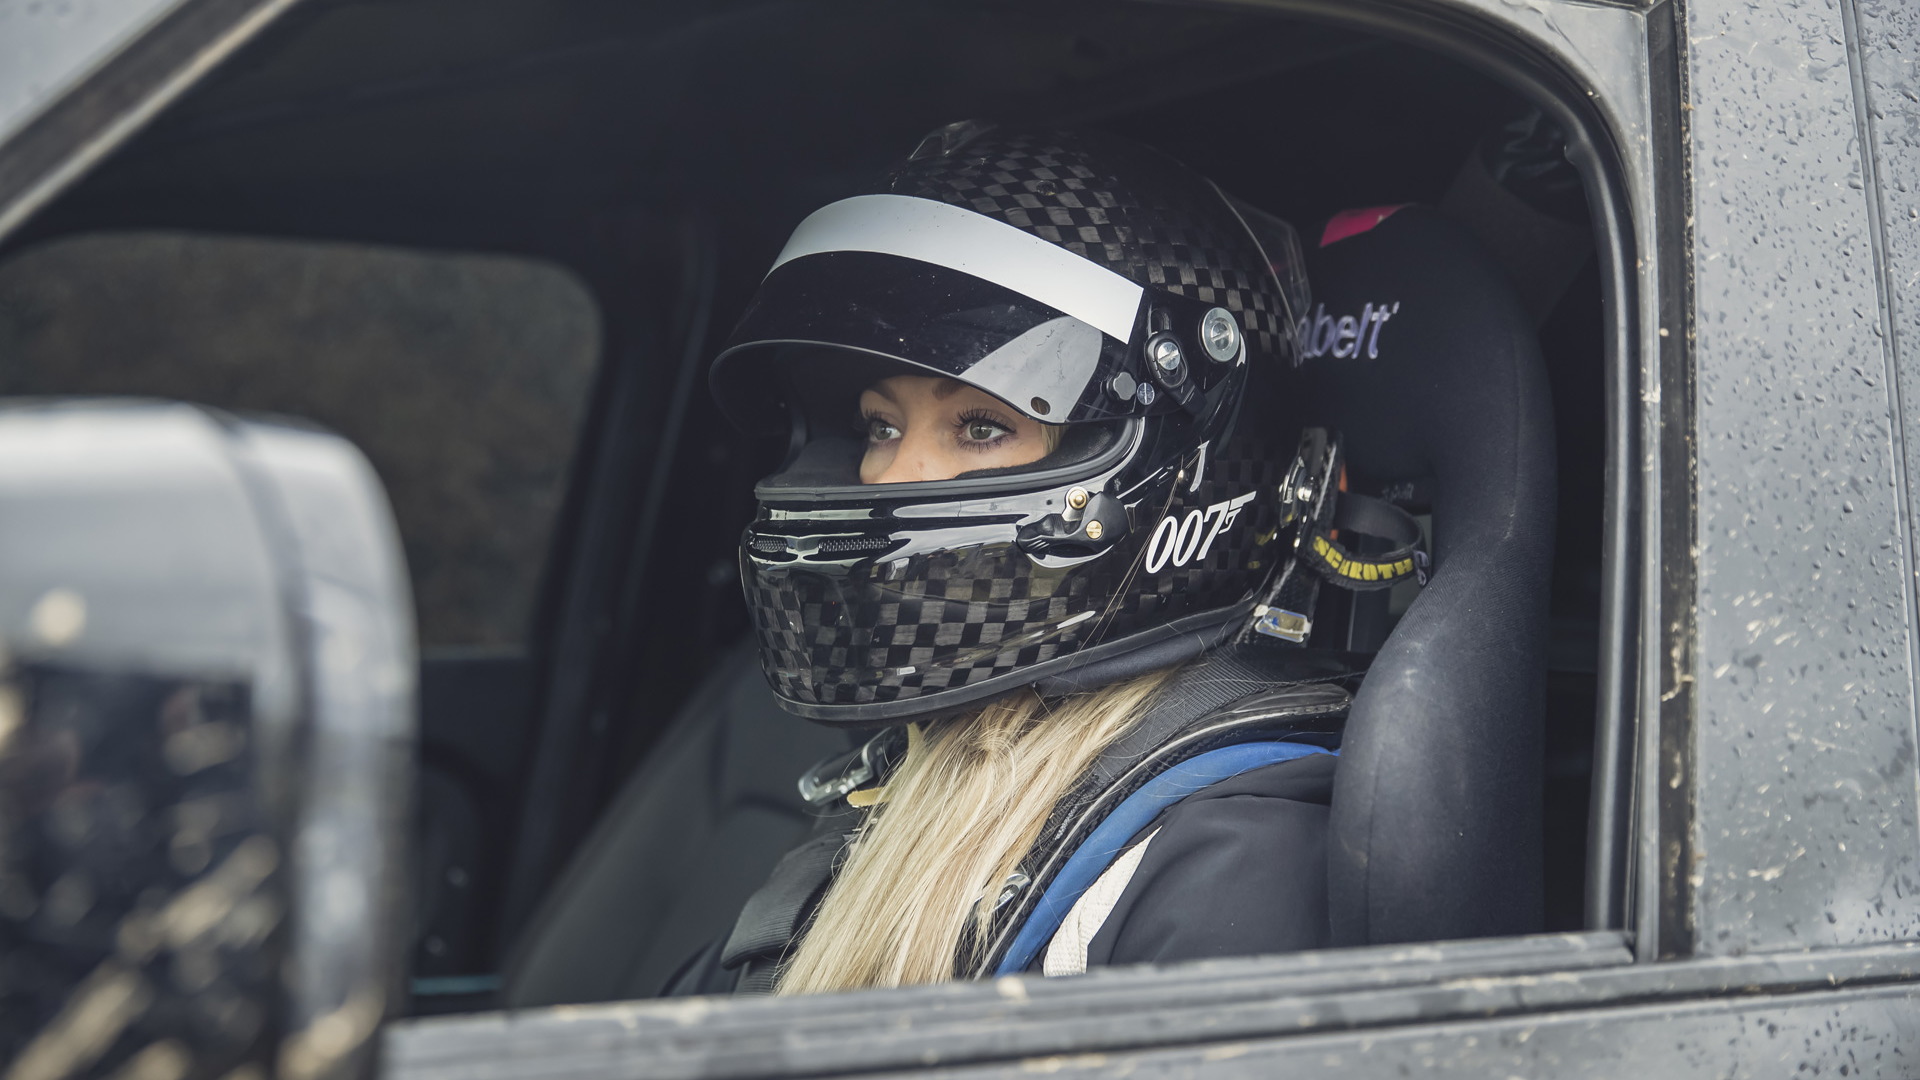 “No Time to Die” stunt driver Jess Hawkins in the 2020 Land Rover Defender